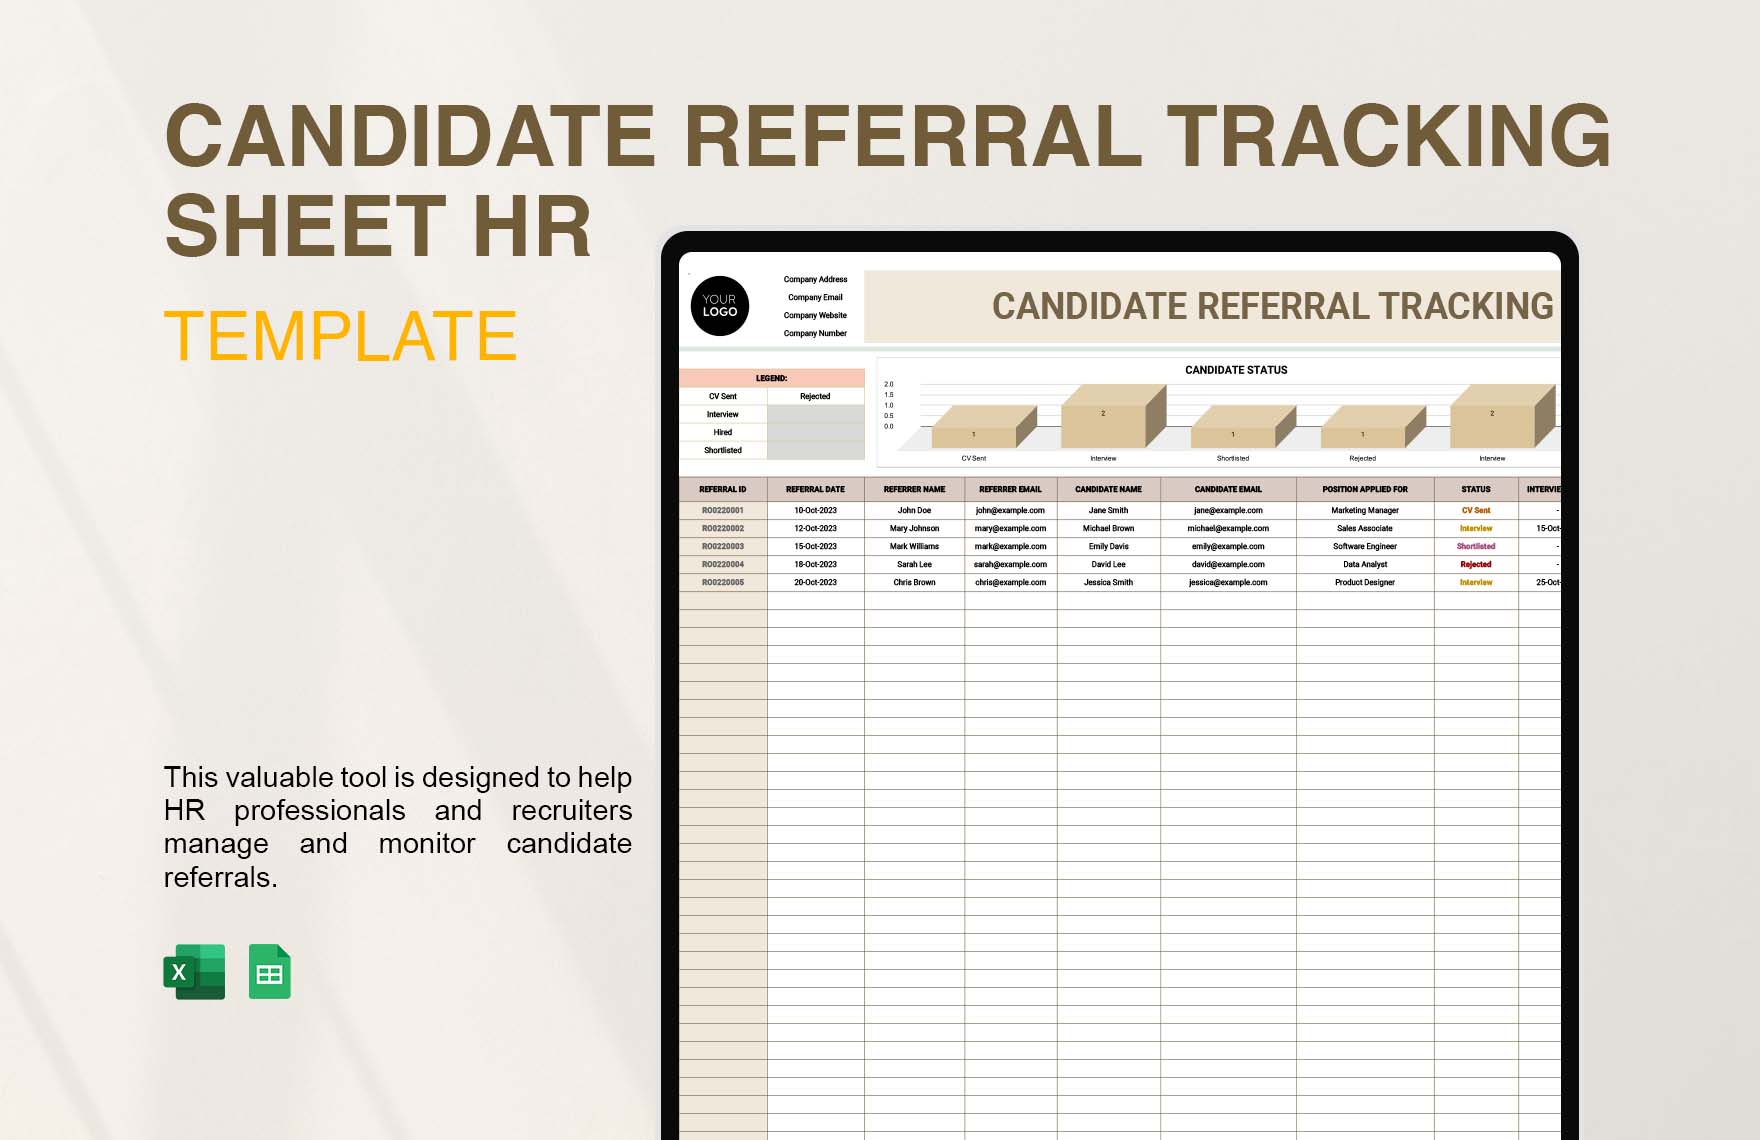 Candidate Referral Tracking Sheet HR Template